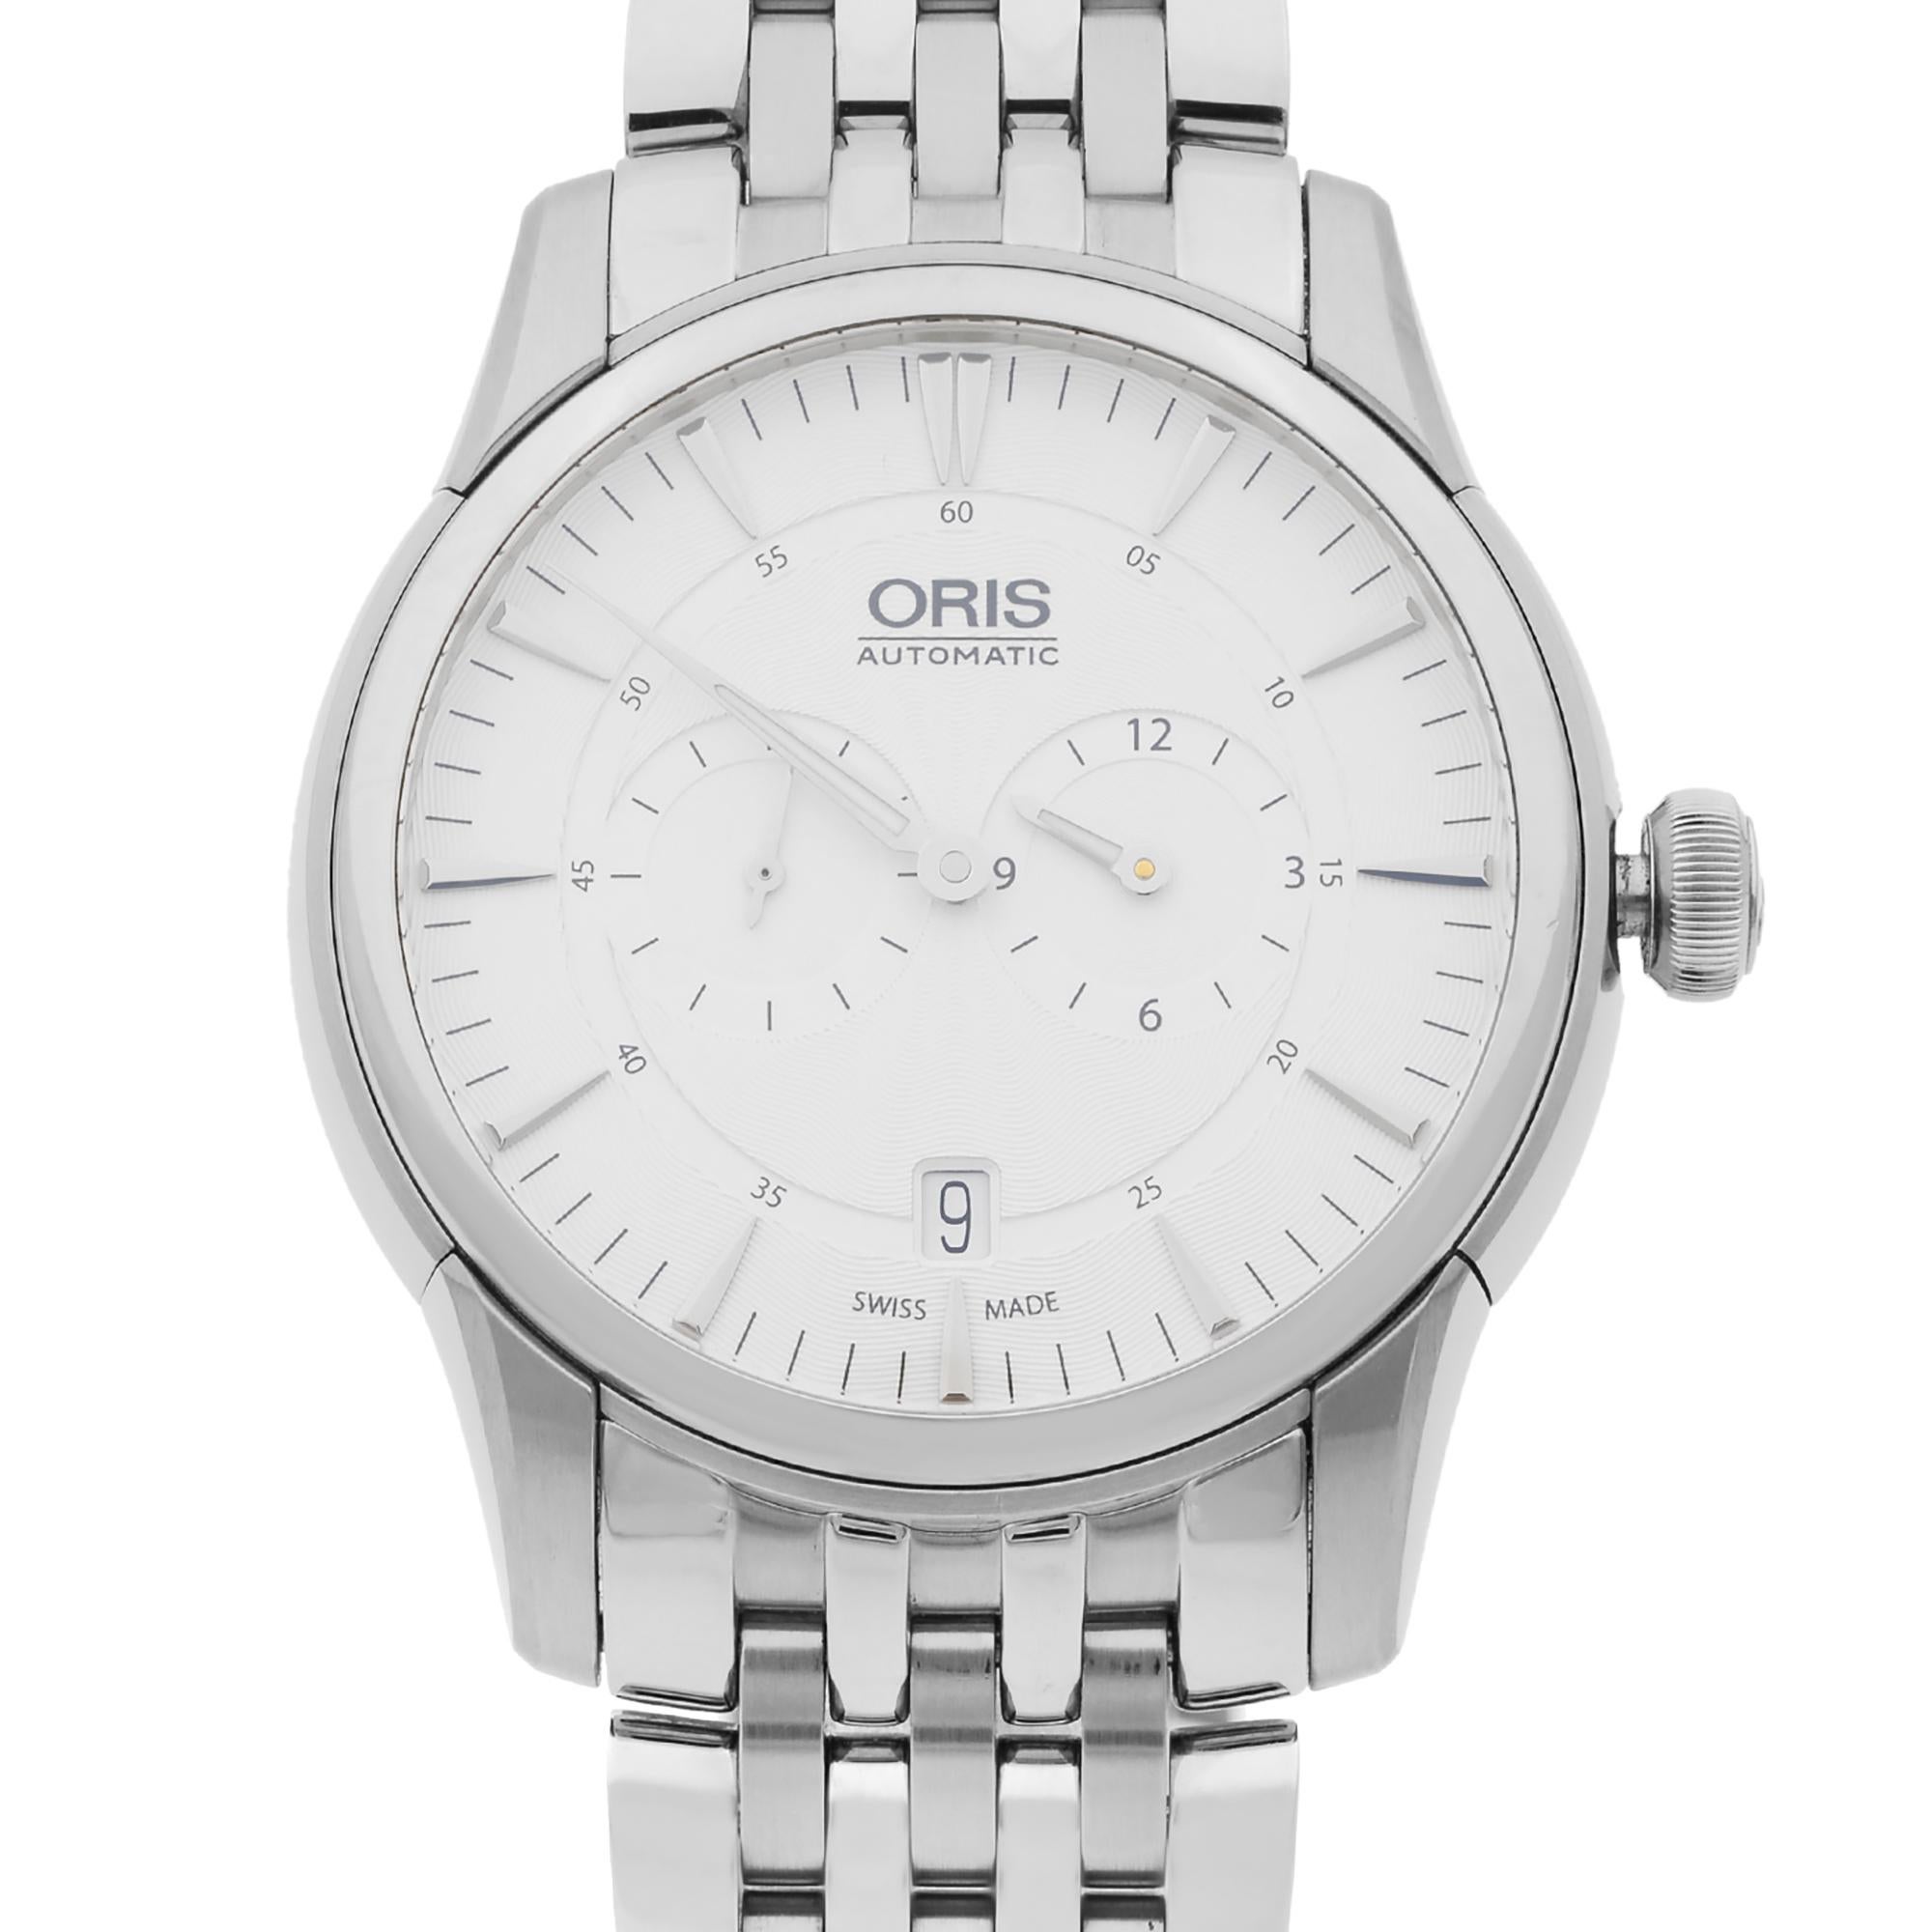 Pre-owned. Recently serviced. Fits 6.5 inches wrist size. Comes with a gift box and seller's warranty card. 

 Brand: Oris  Type: Wristwatch  Department: Men  Model Number: 01 749 7667 4051-07 8 21 77  Country/Region of Manufacture: Switzerland 